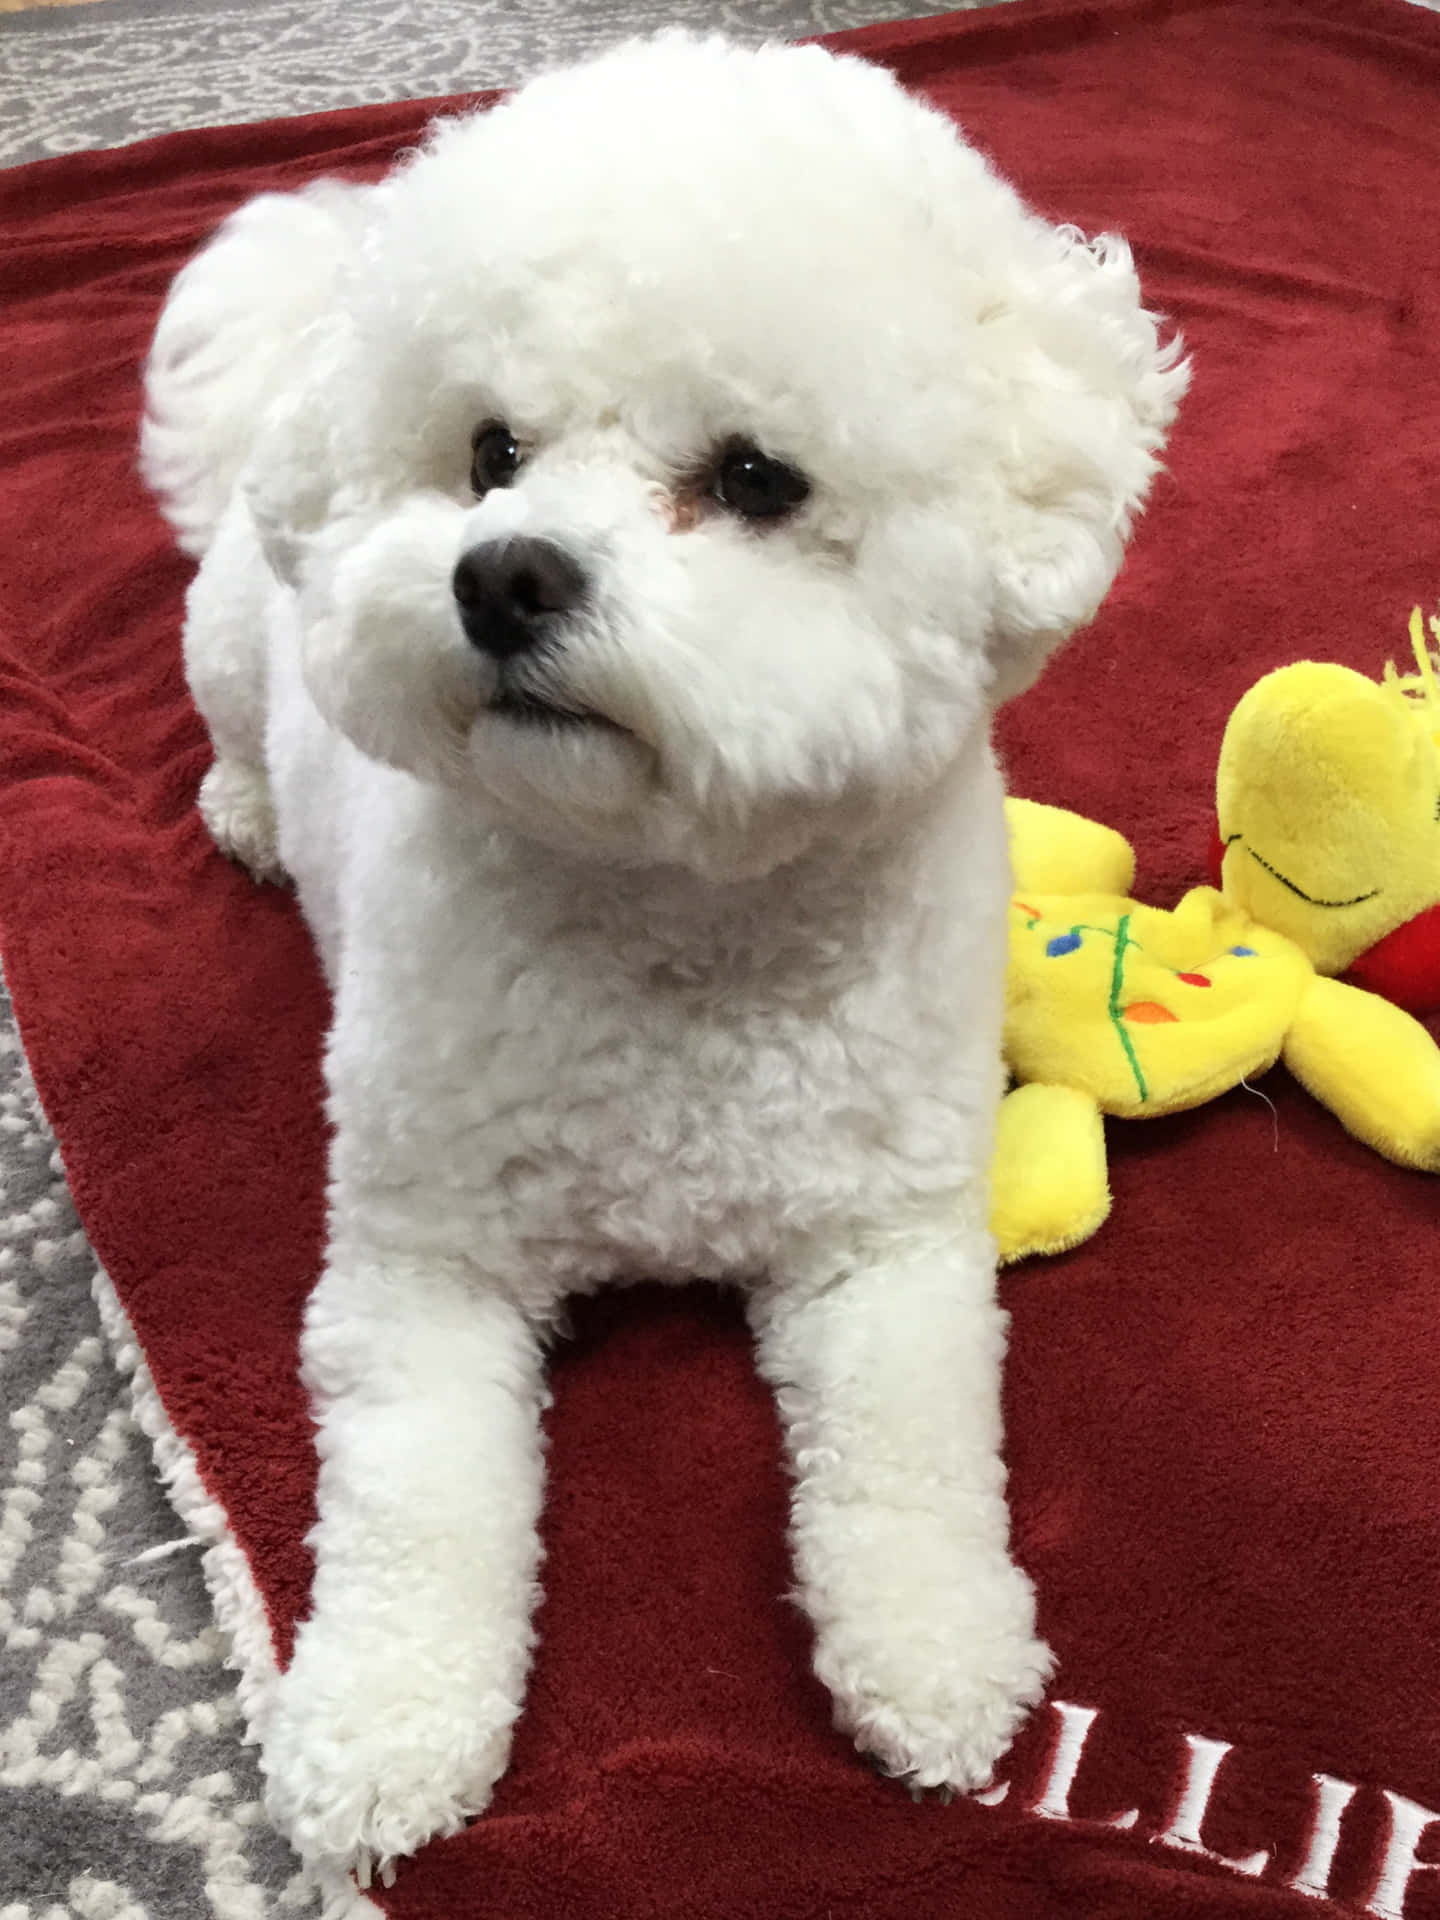 A friendly Bichon Frise pup poses for a photo